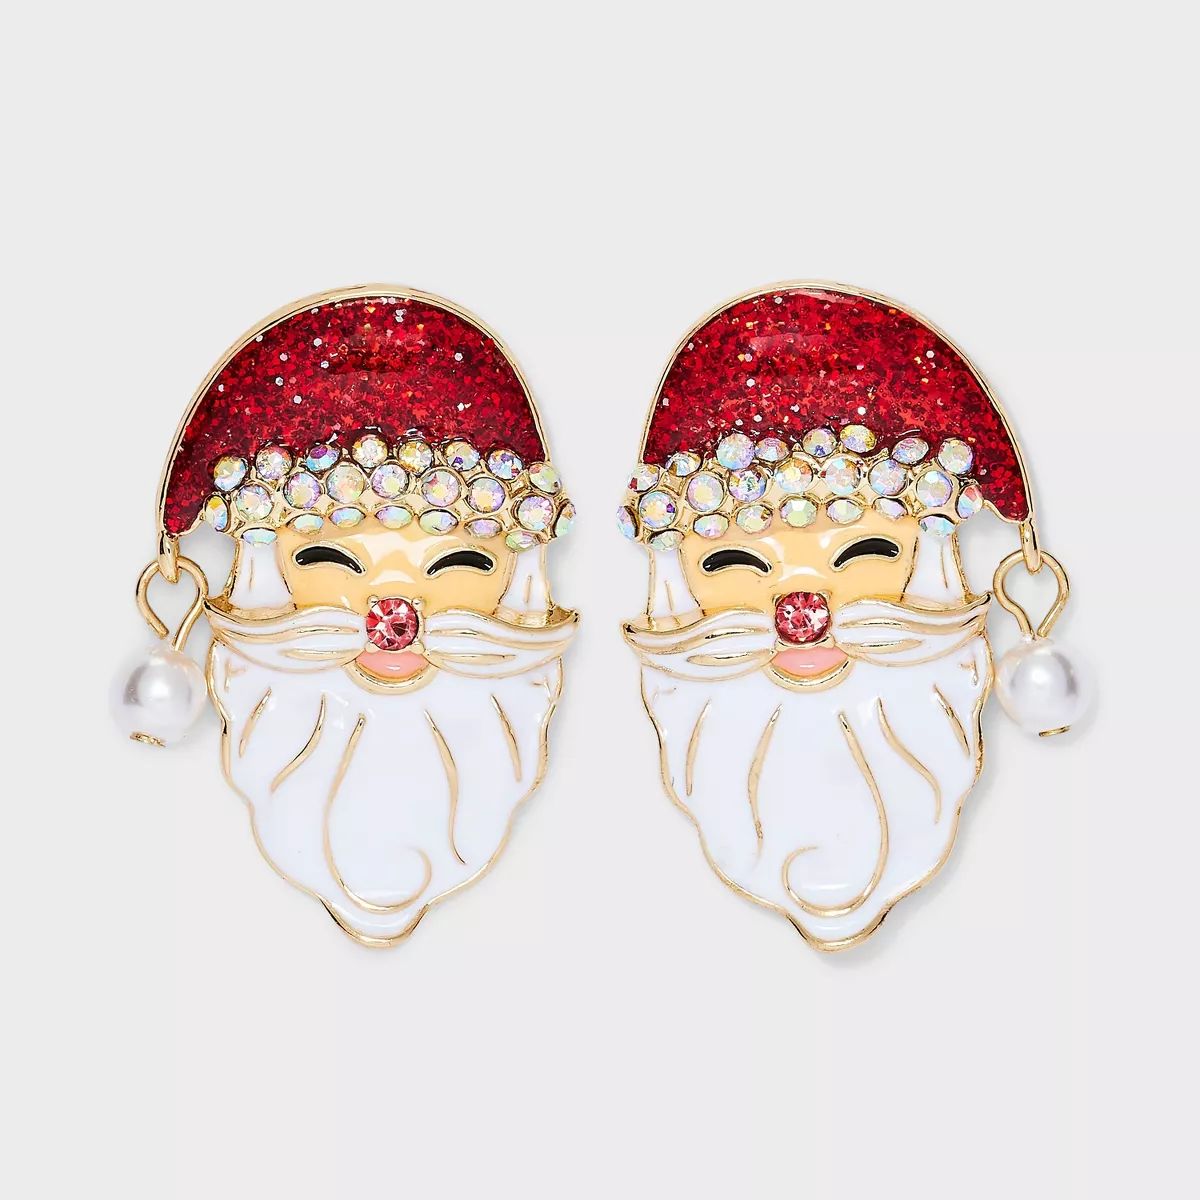 SUGARFIX by BaubleBar "Down the Chimney" Statement Earrings - Red | Target